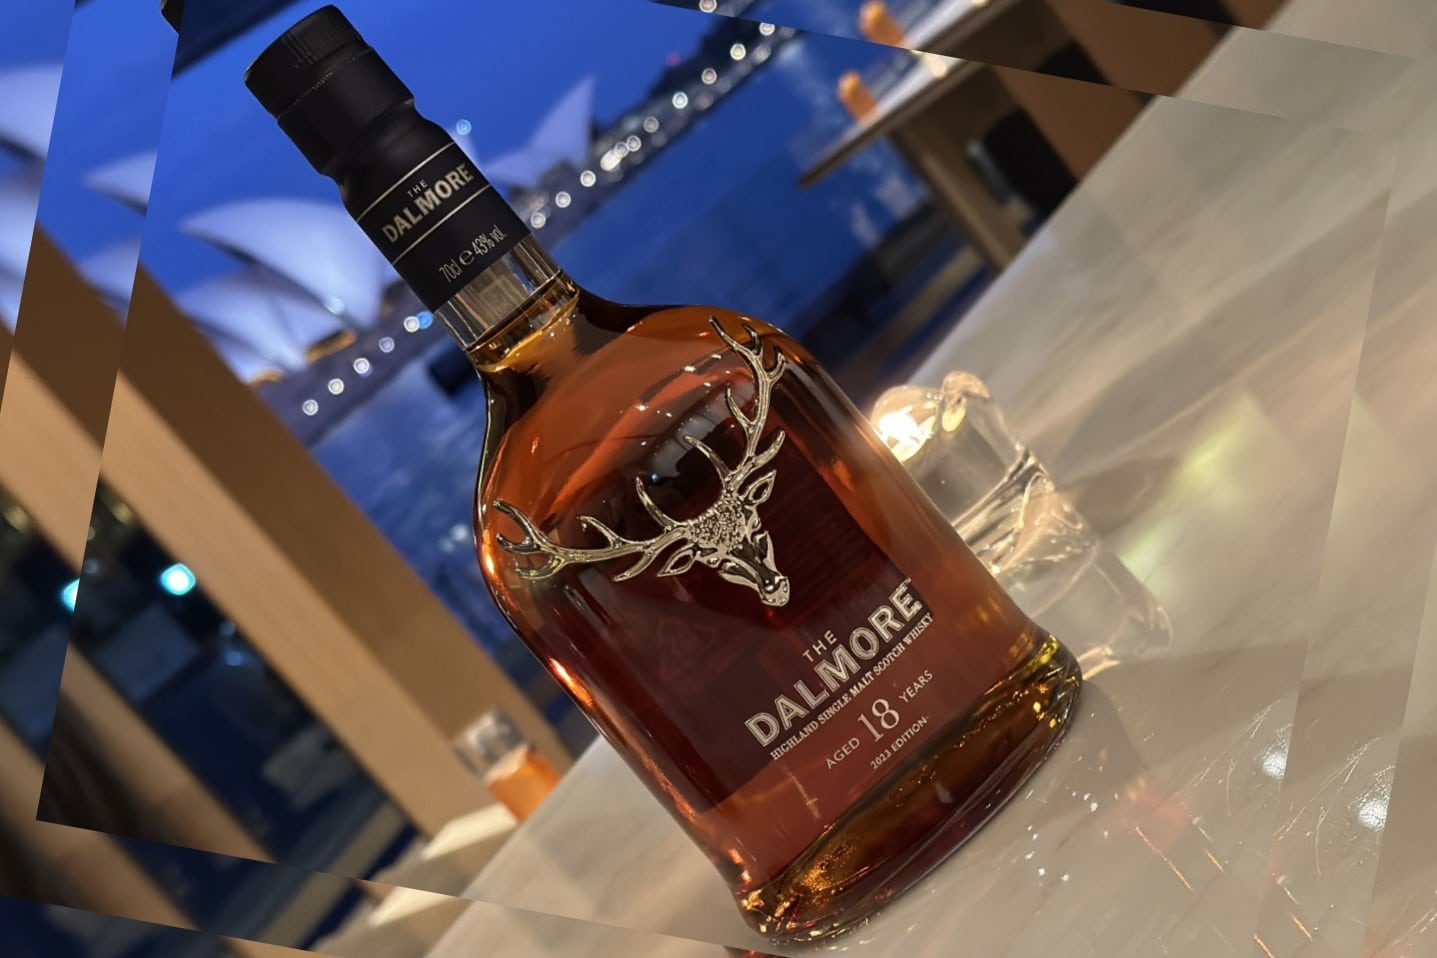 Dalmore - The distillery and its whiskies - Whisky and Wisdom